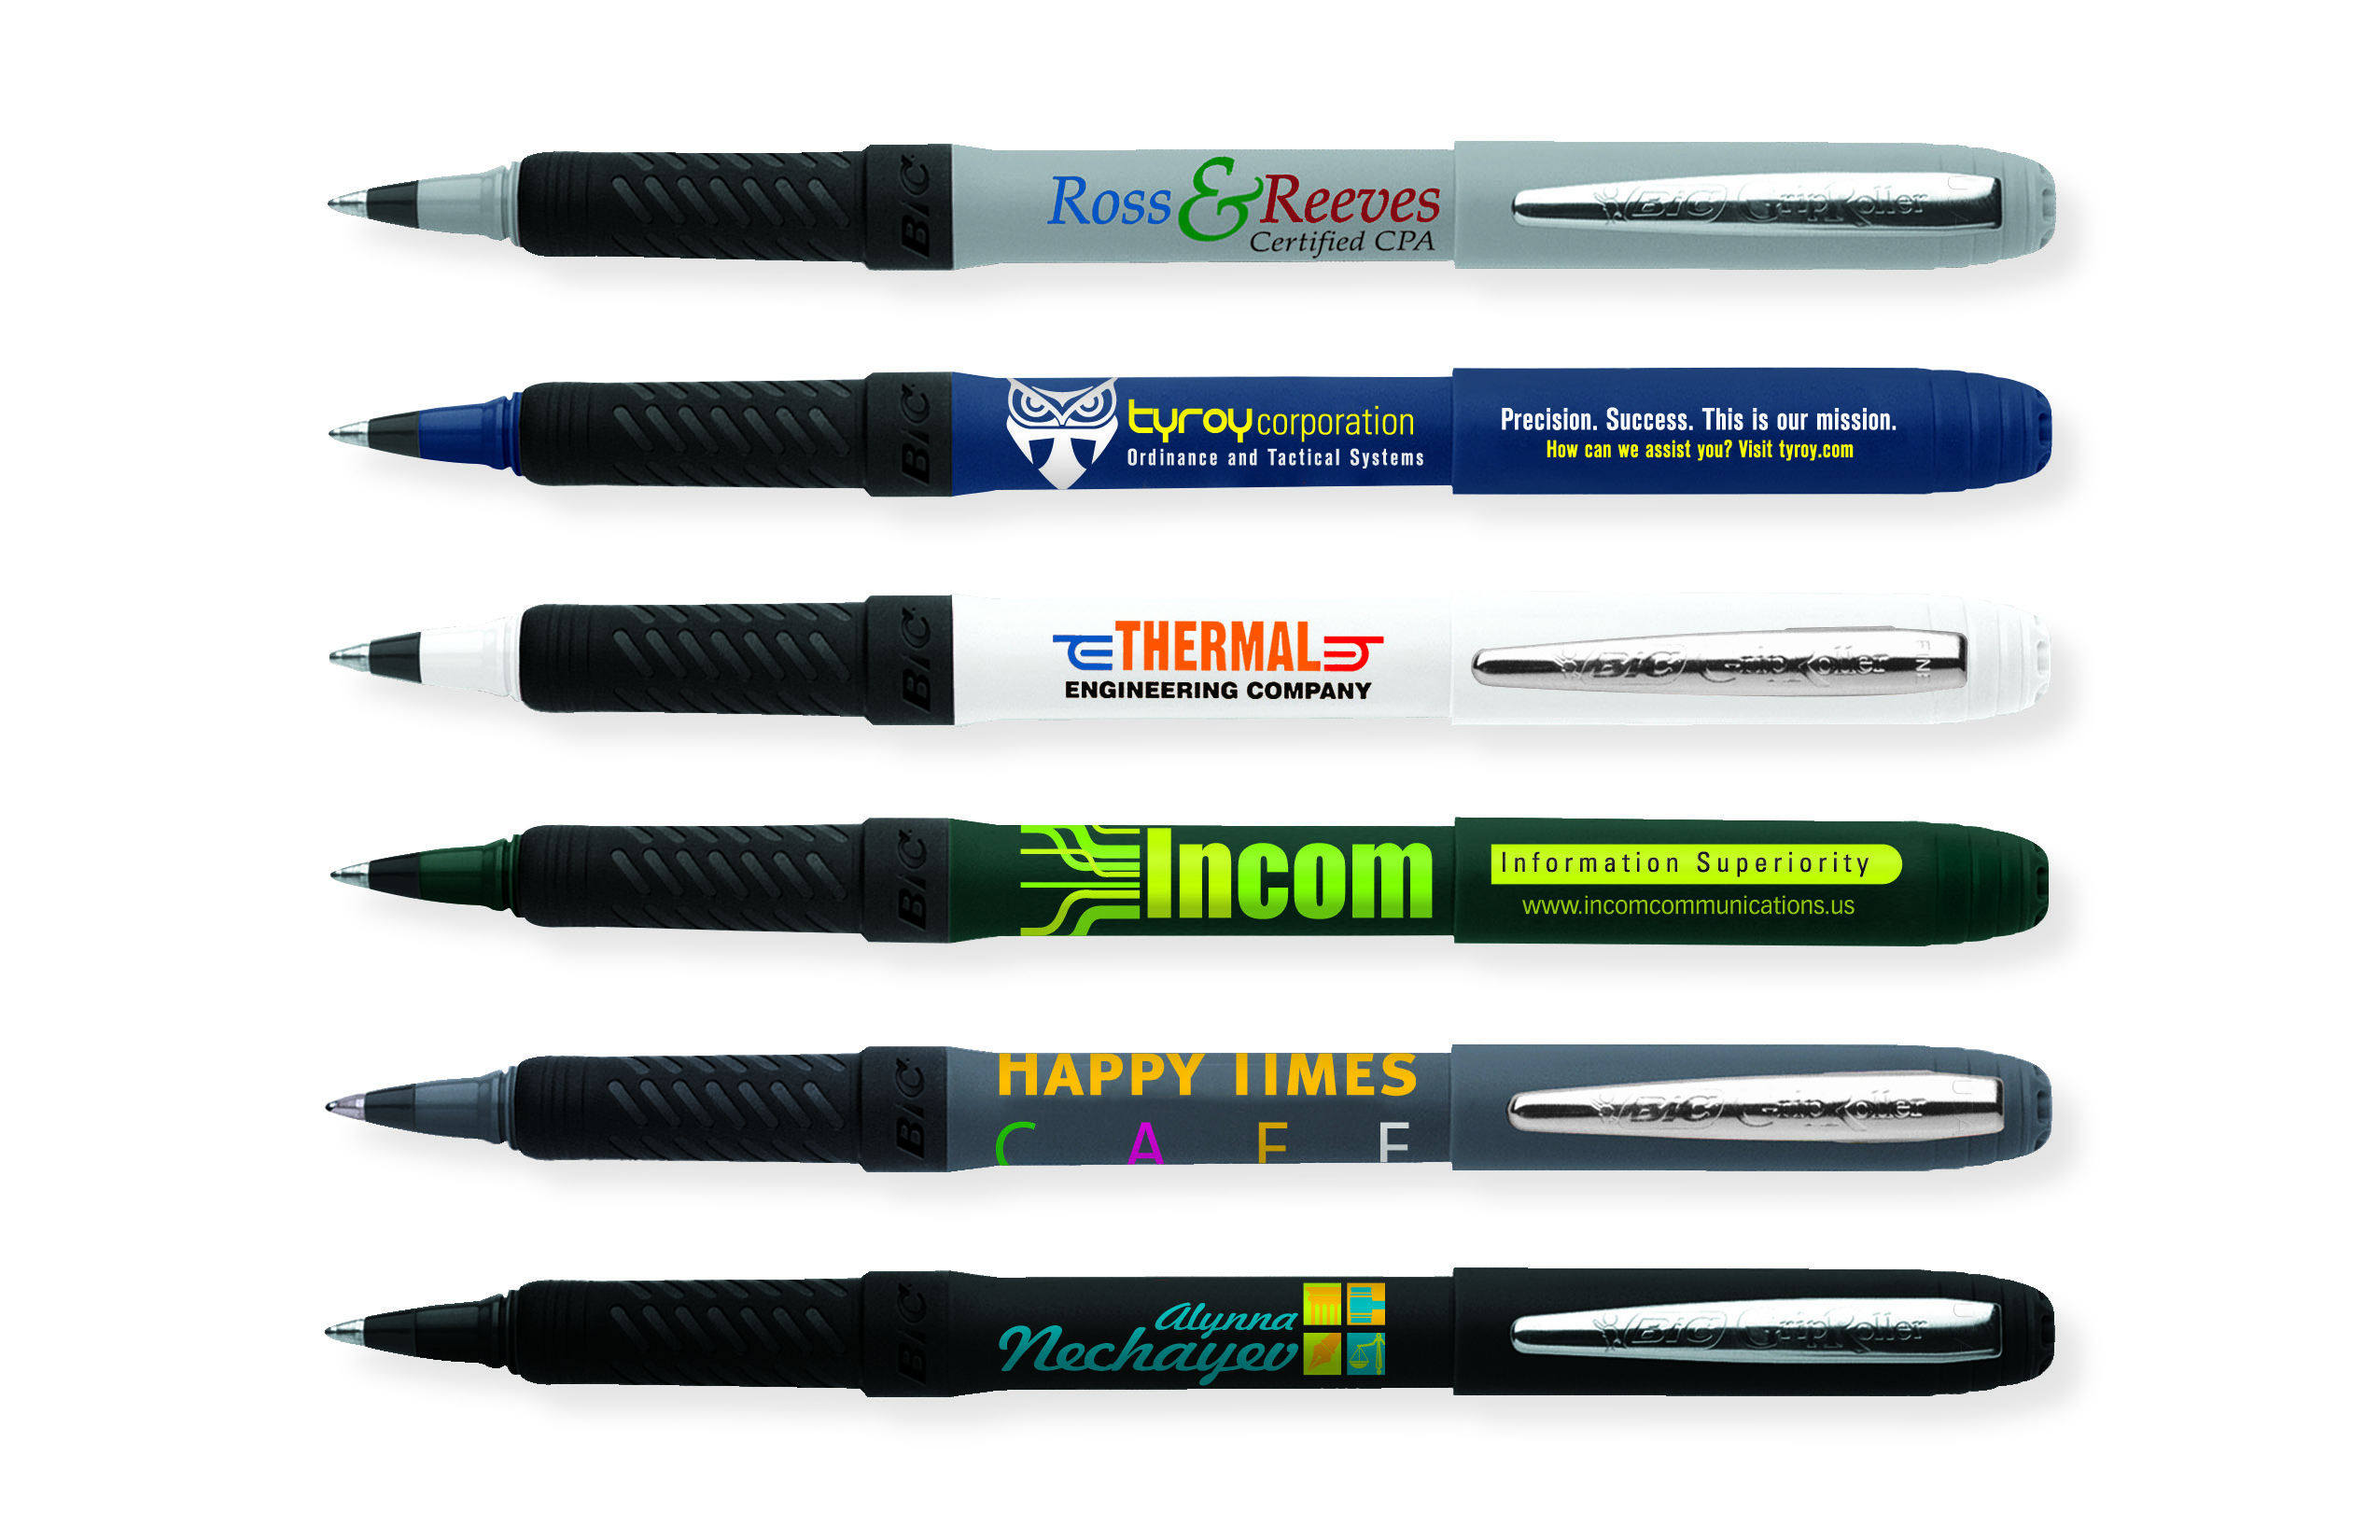 BIC Promo Pens Announce The Sale Of The BIC Grip Roller Promotional Pens